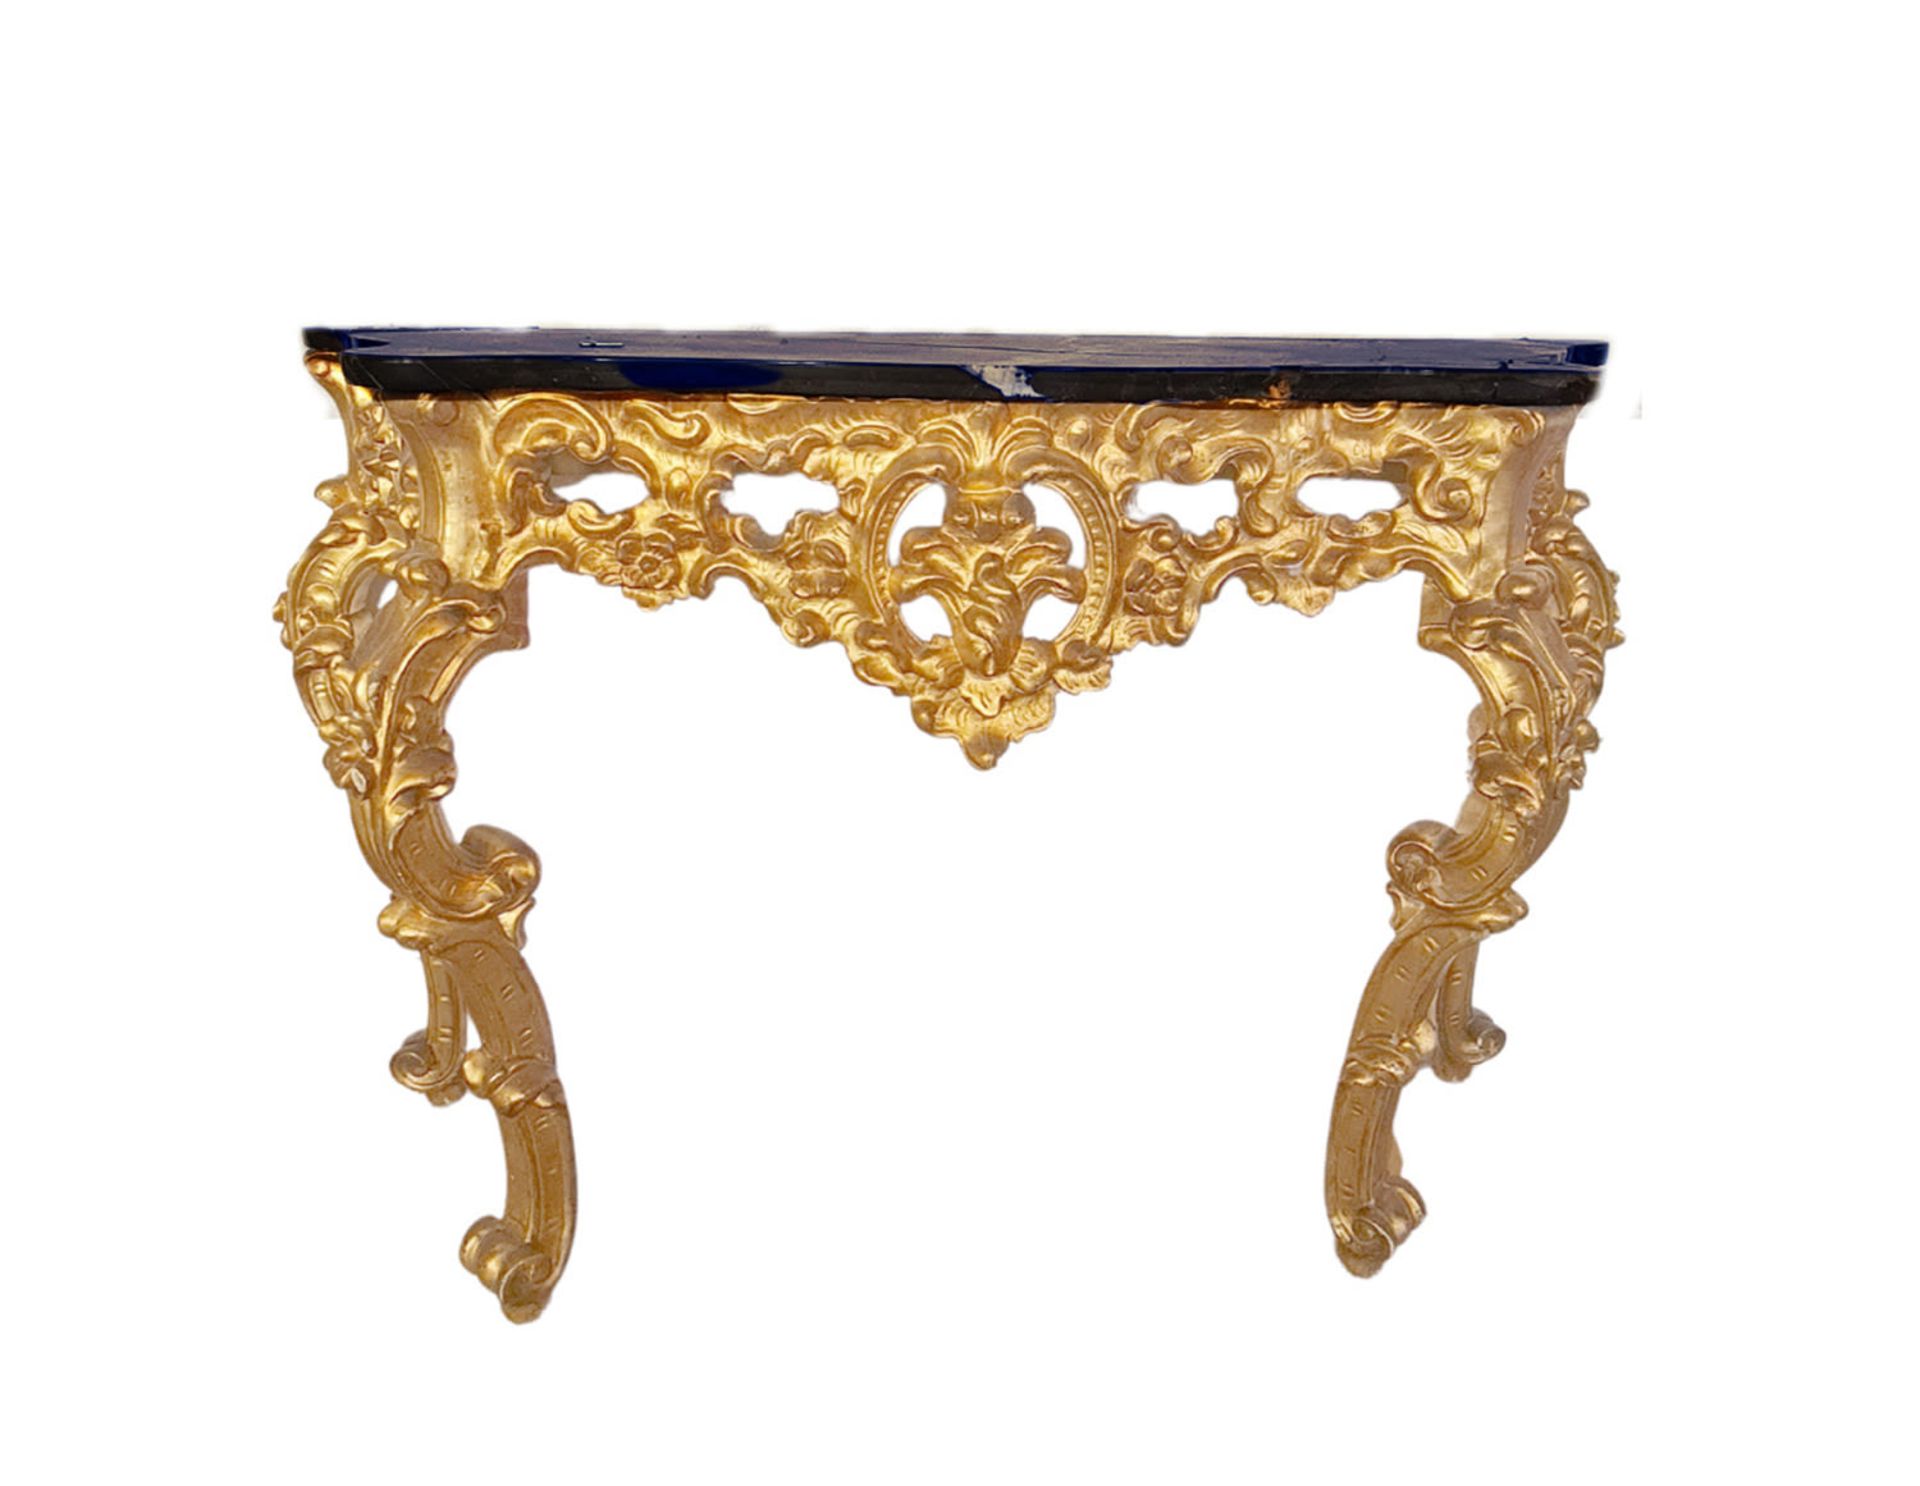 Italian console with green marbled wood top, 18th - 19th centuries